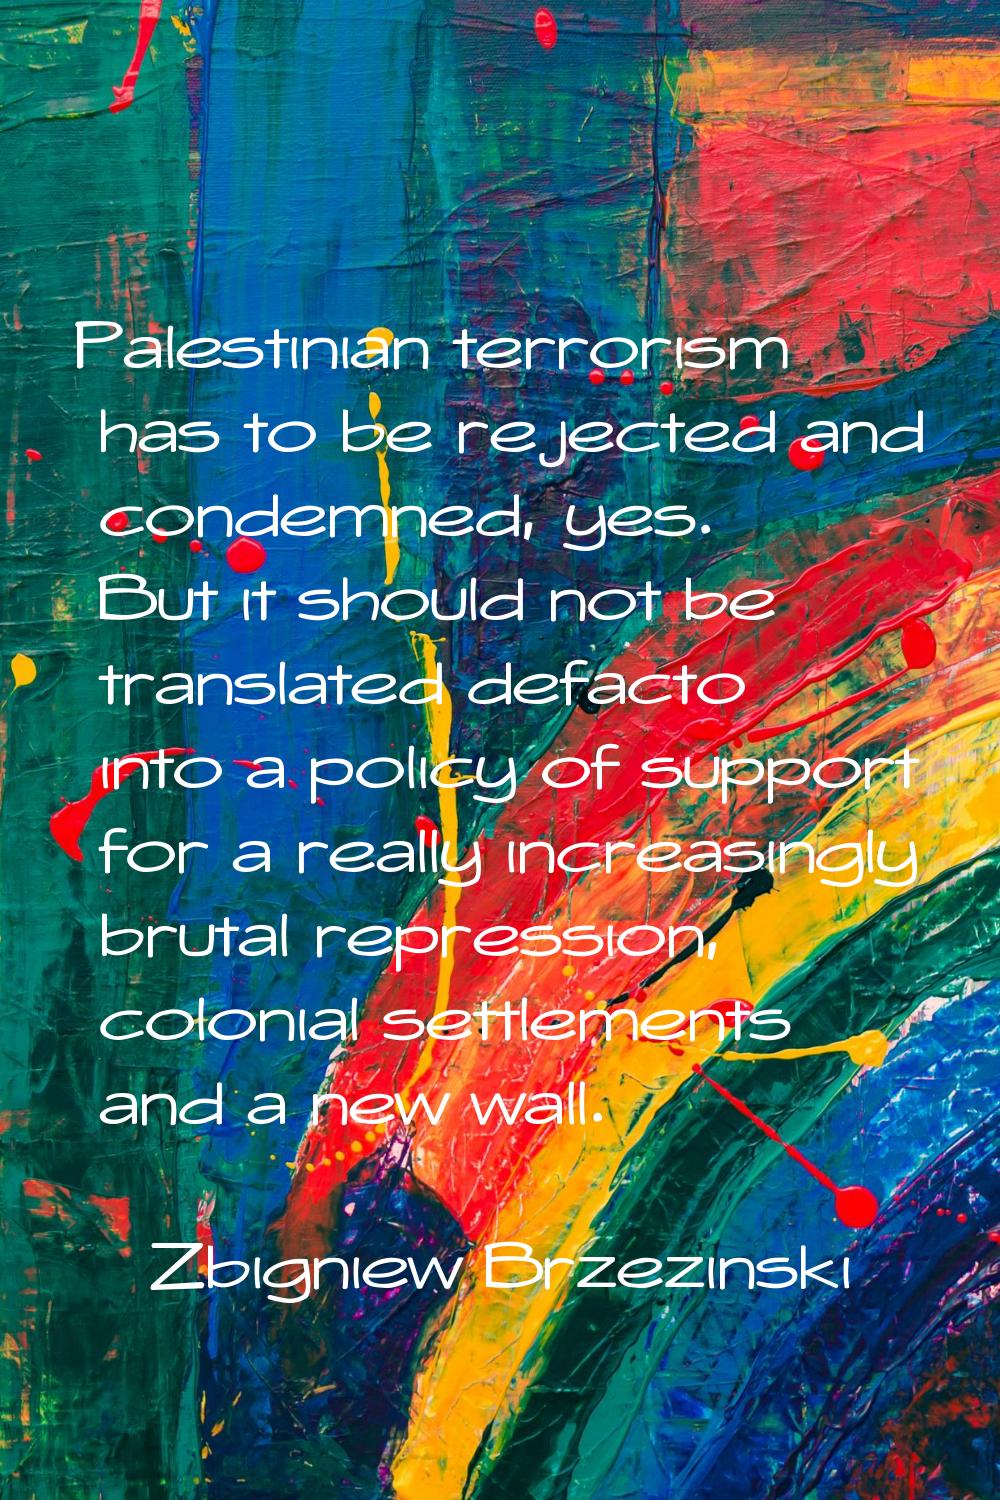 Palestinian terrorism has to be rejected and condemned, yes. But it should not be translated defact